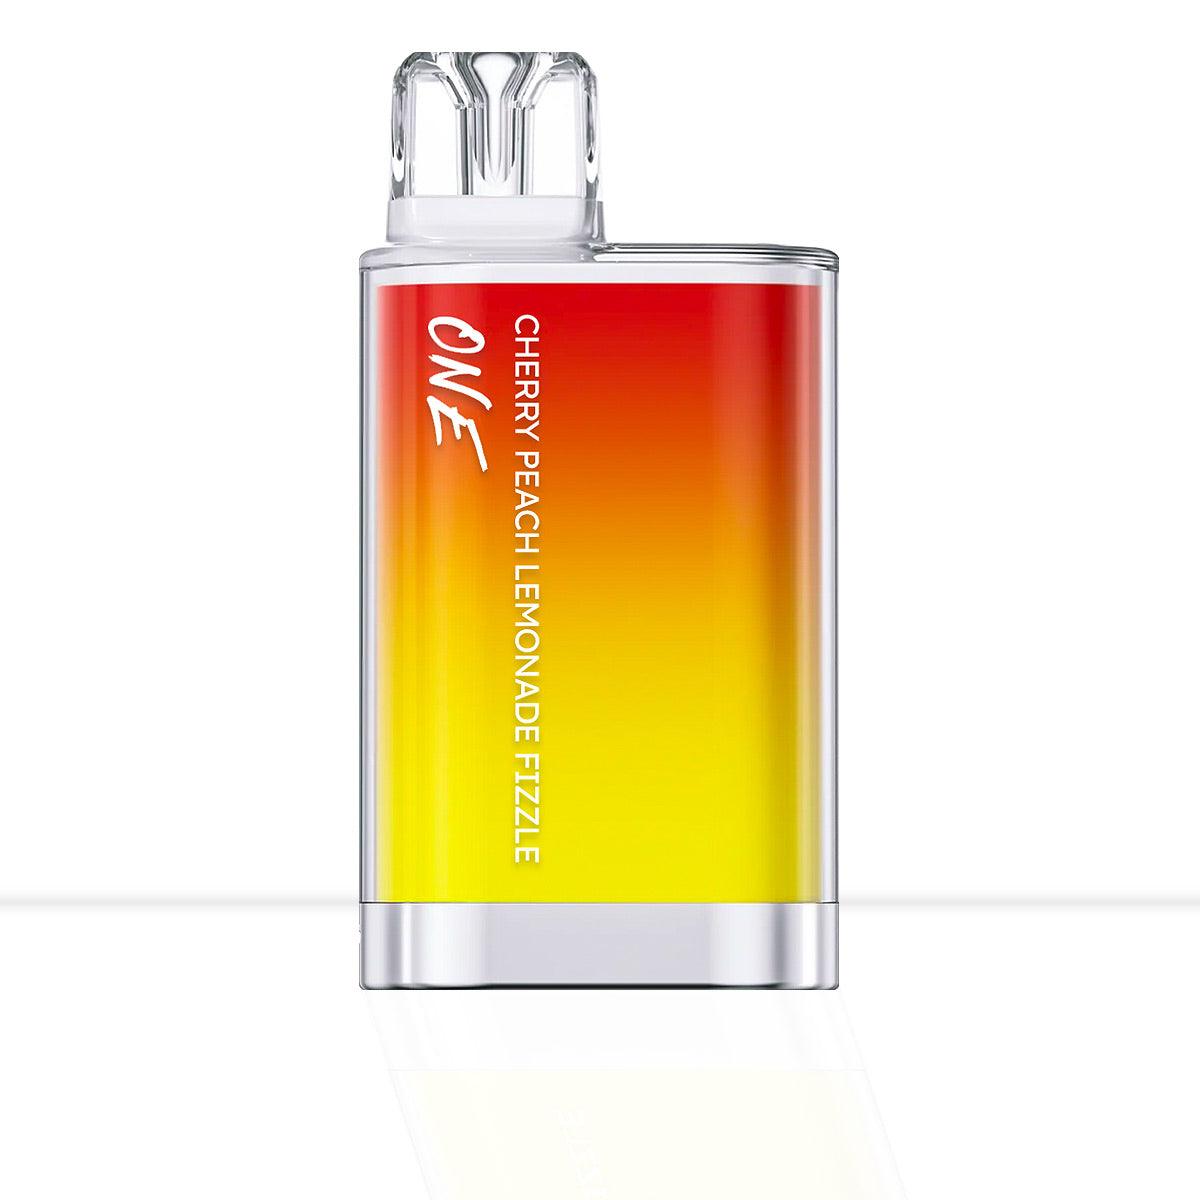 red and yellow box-style disposable vape